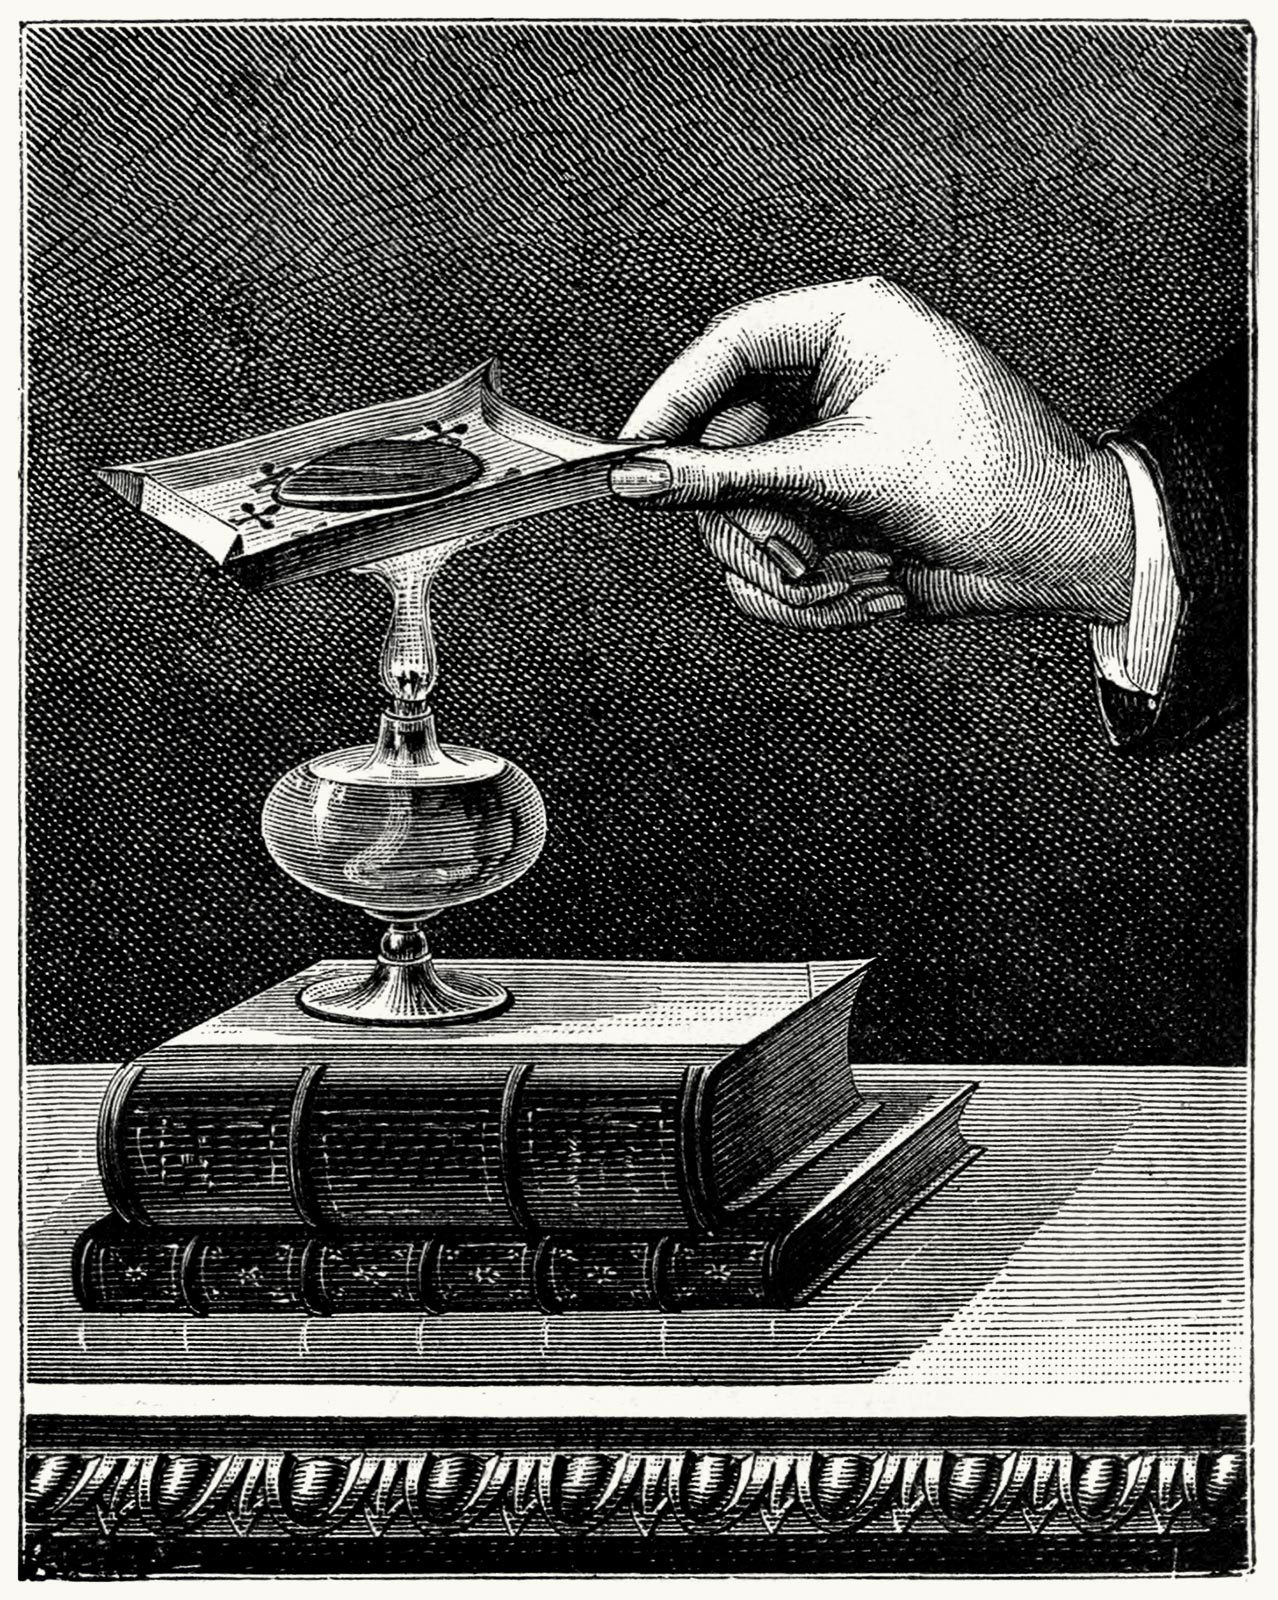 oldbookillustrations:

Melting a piece of tin on a card.

From Popular scientific recreations, by Gaston Tissandier, London, 1883.

(Source: archive.org.)